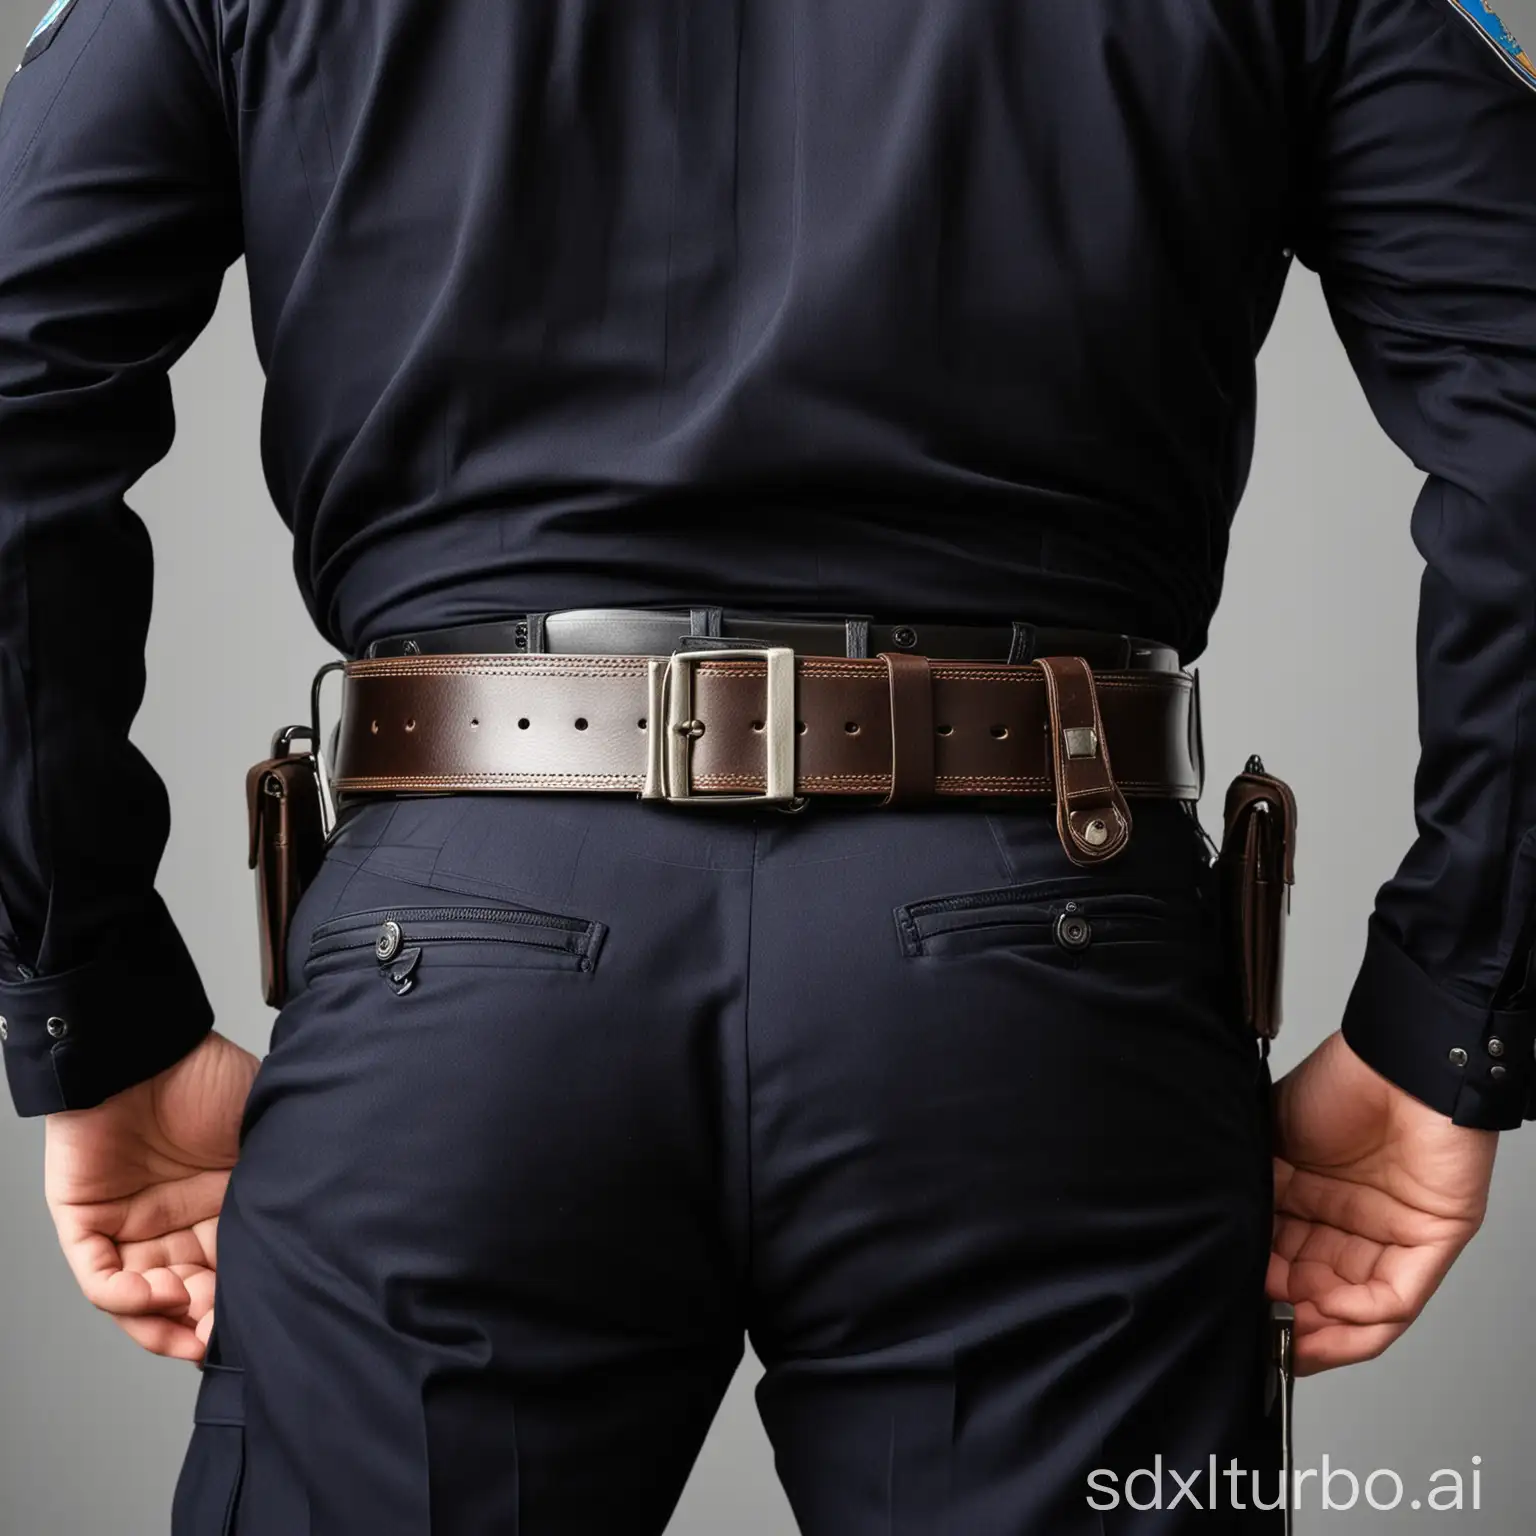 The back of an American police officer, with a belt